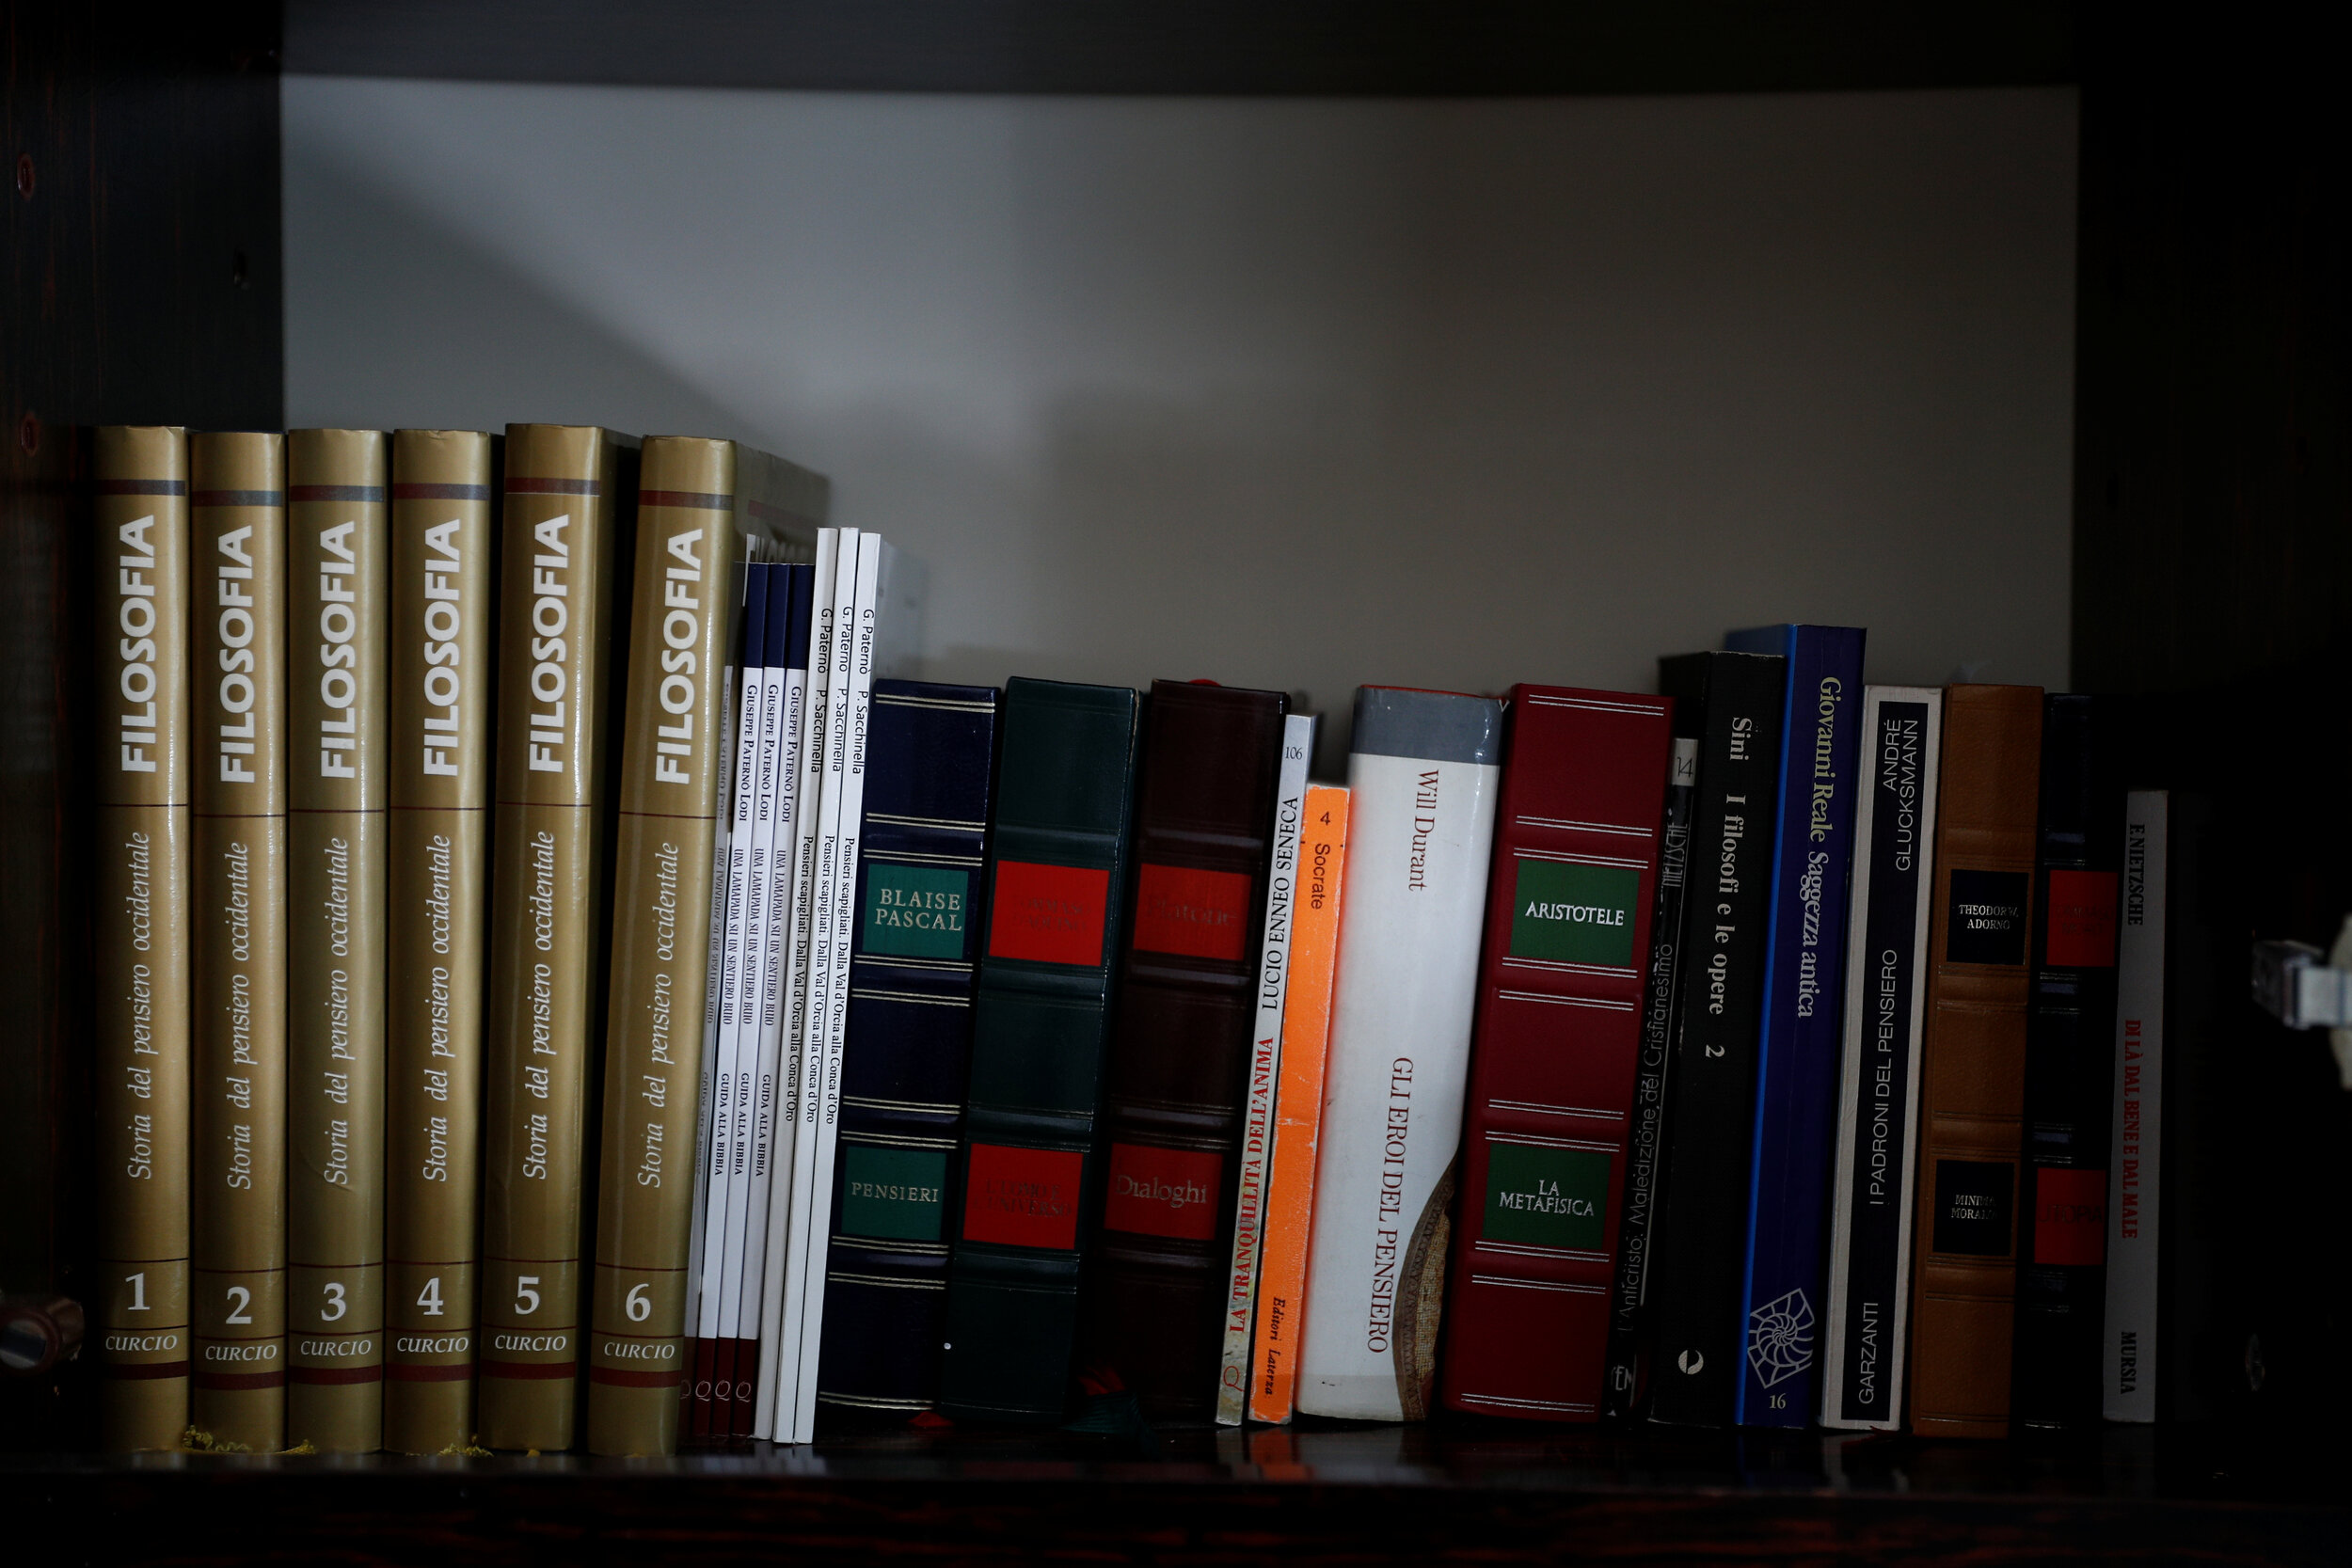  Philosophy books belonging to Giuseppe Paterno, 96, Italy's oldest student, stand on a shelf, a day before he graduates from The University of Palermo with an undergraduate degree in history and philosophy, at his home in Palermo, Italy, July 28, 20